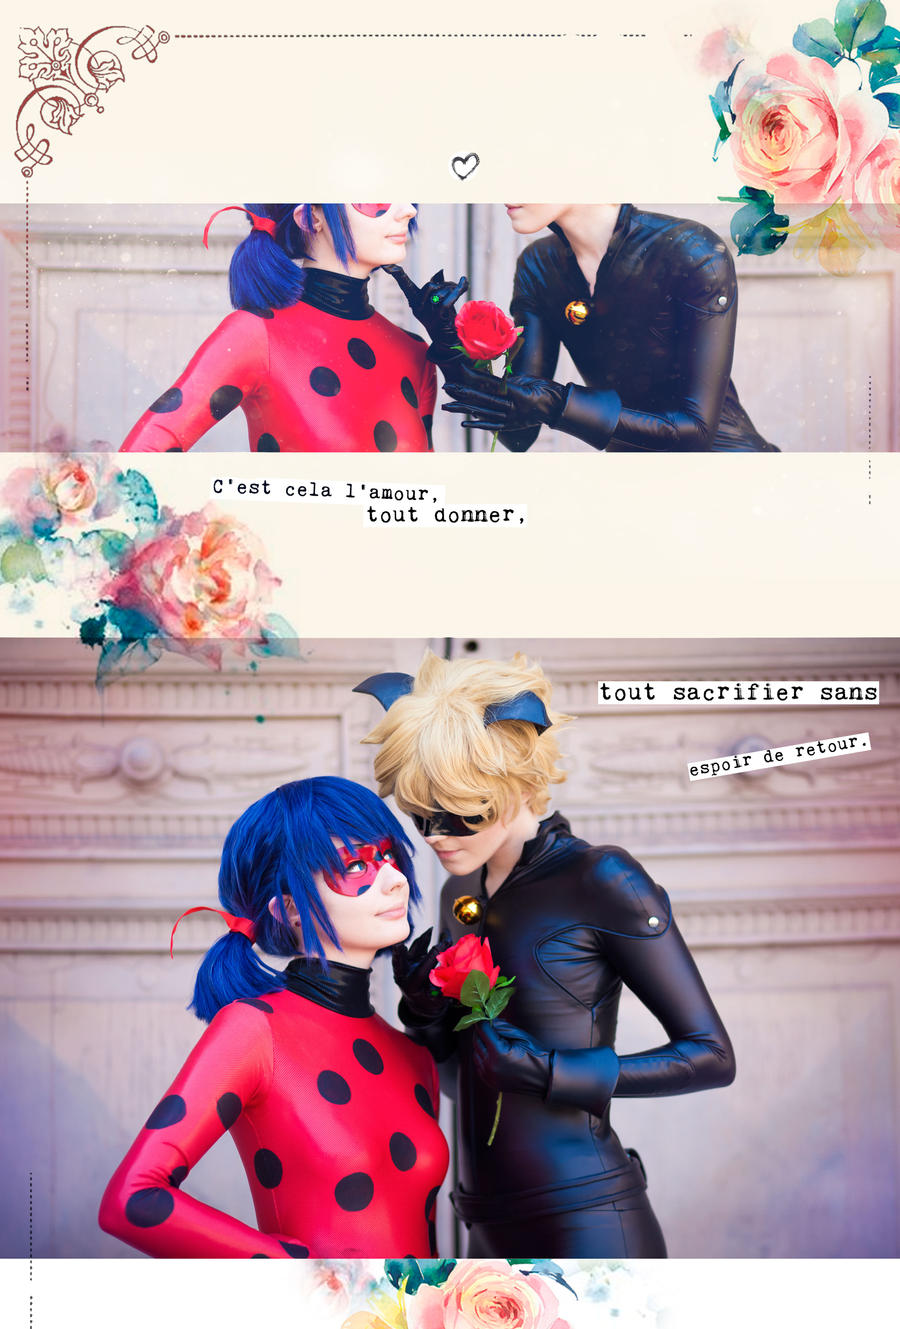 Characters appearing in Miraculous: Ladybug & Chat Noir Manga